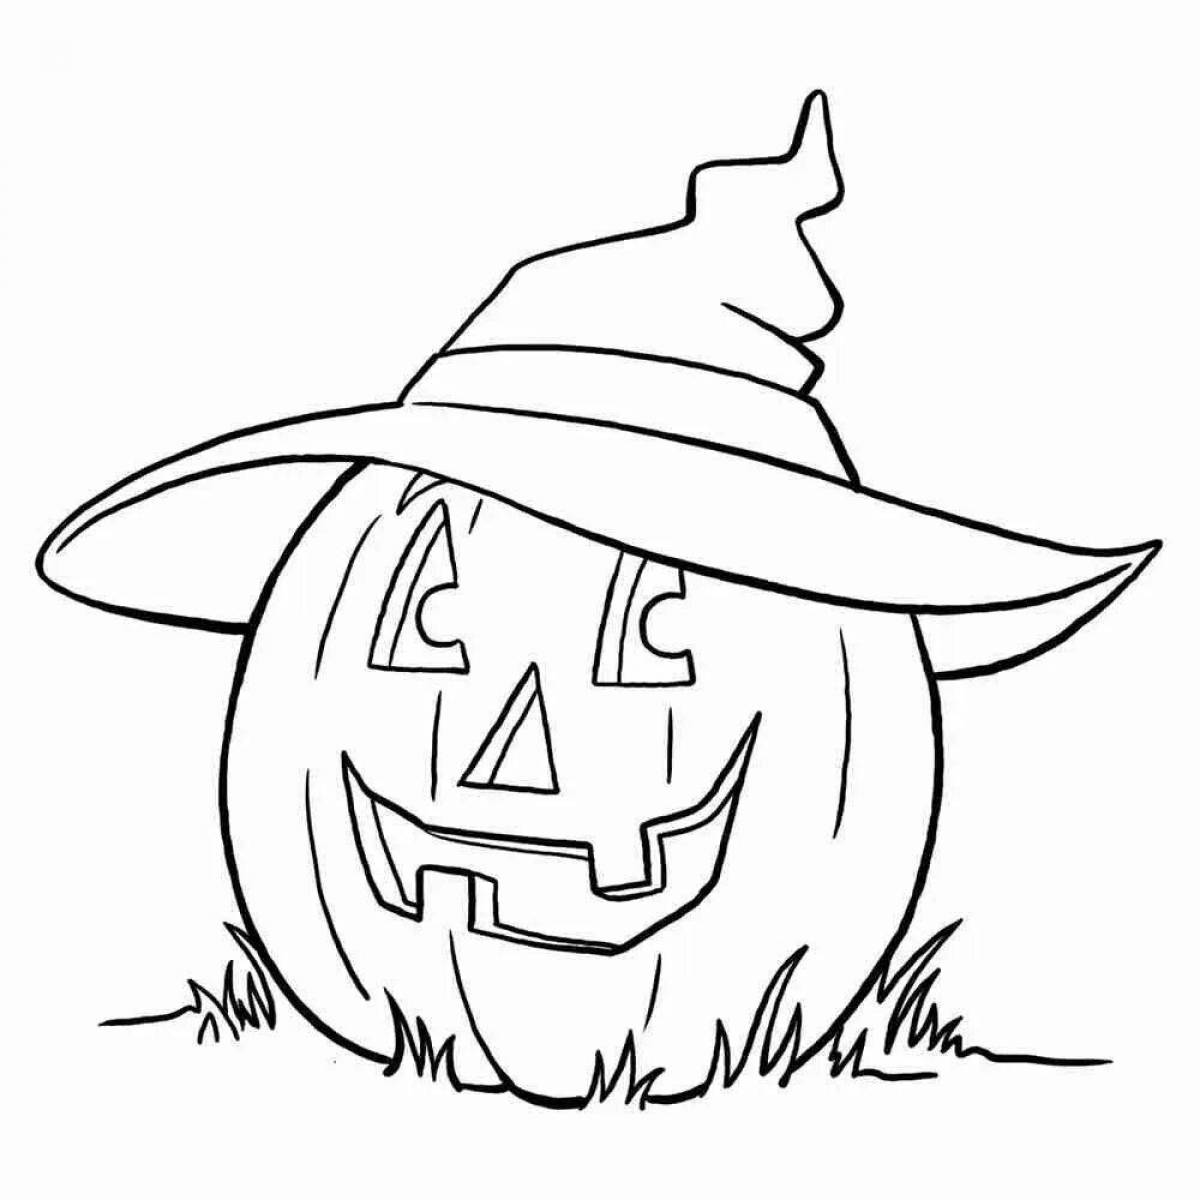 Halloween ugly pumpkin coloring page